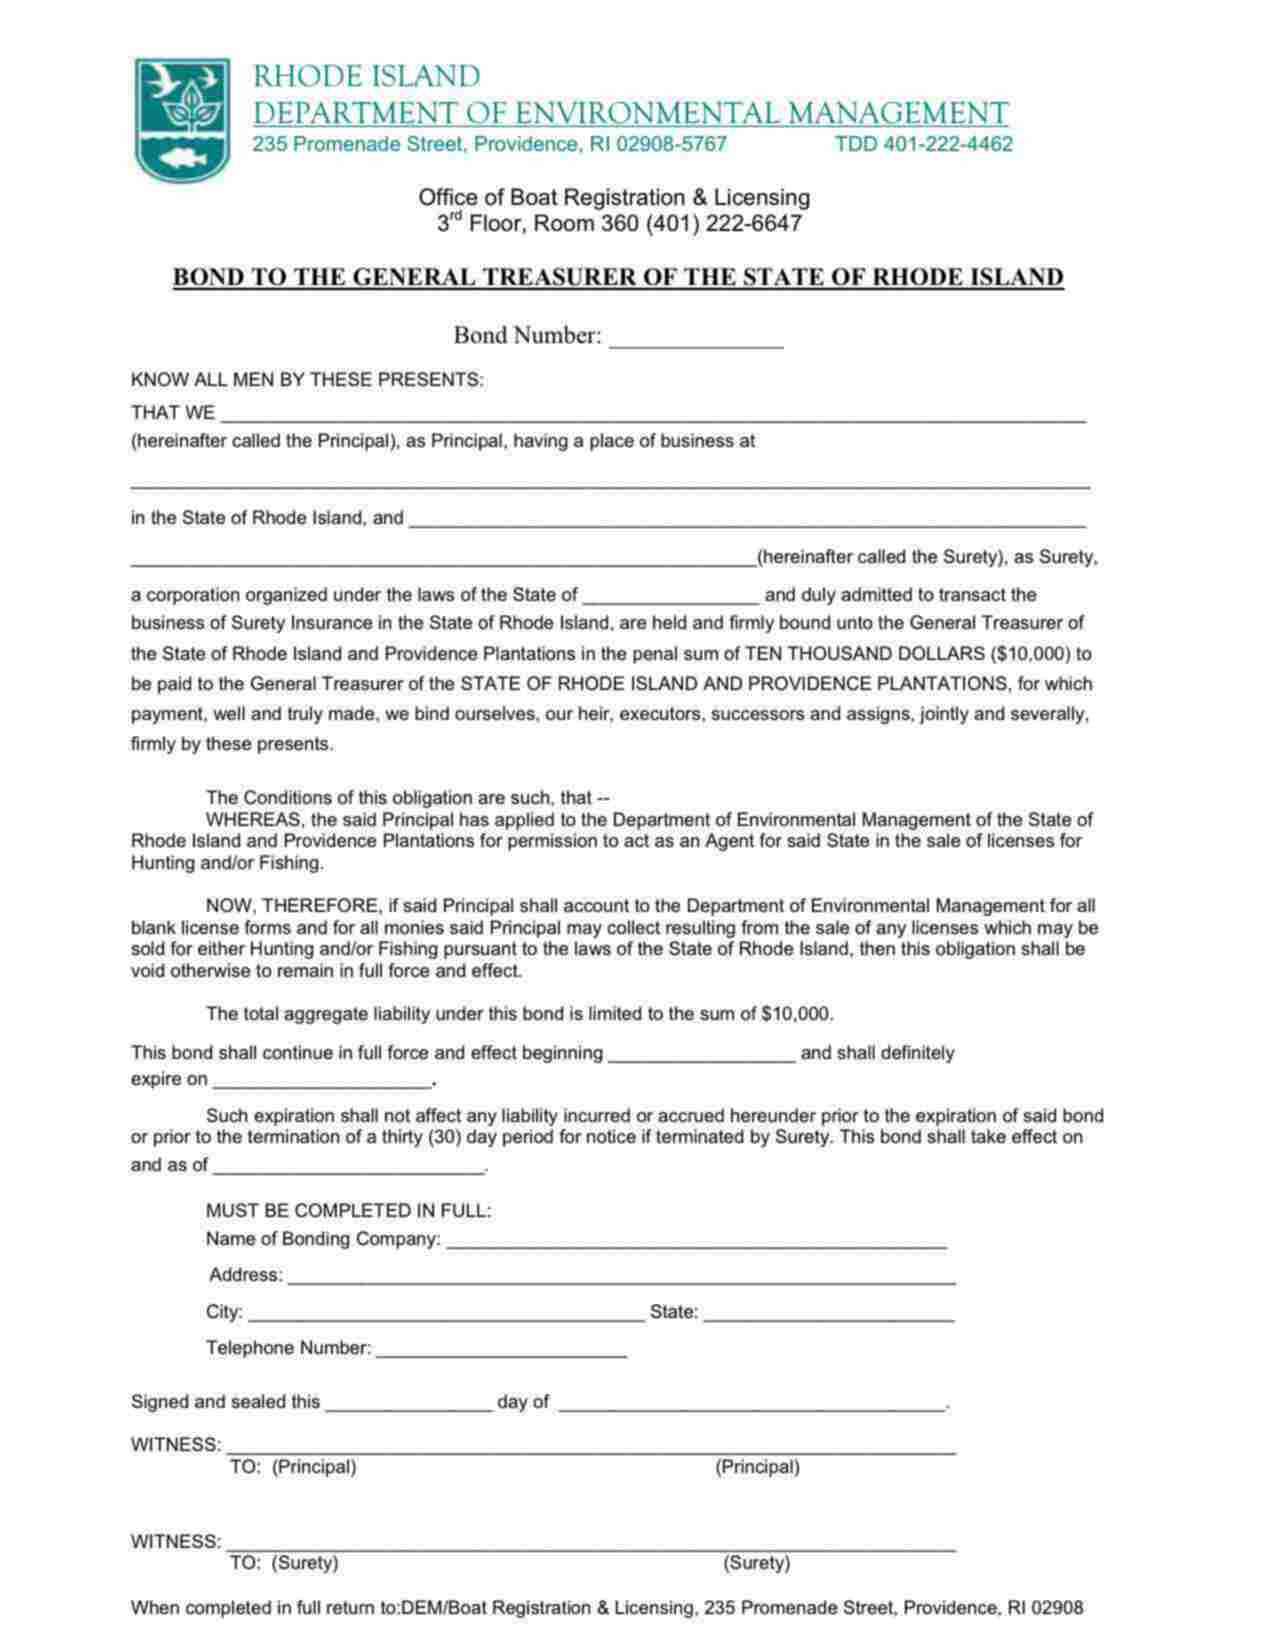 Rhode Island Hunting and/or Fishing License Agent Bond Form